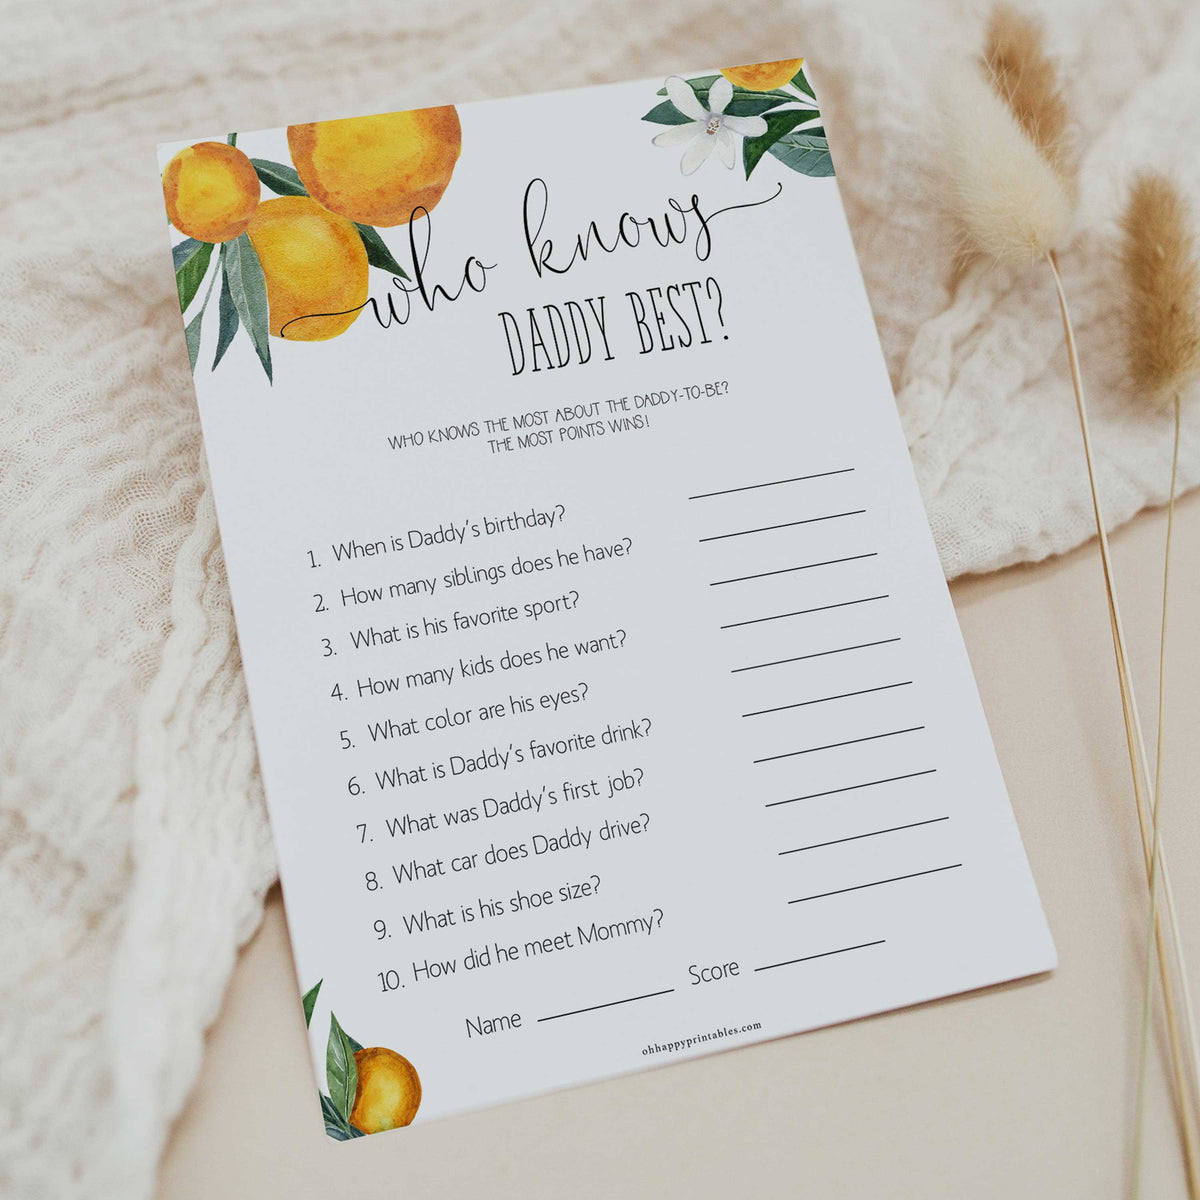 who knows daddy best game, Printable baby shower games, little cutie baby games, baby shower games, fun baby shower ideas, top baby shower ideas, little cutie baby shower, baby shower games, fun little cutie baby shower ideas, citrus baby shower games, citrus baby shower, orange baby shower